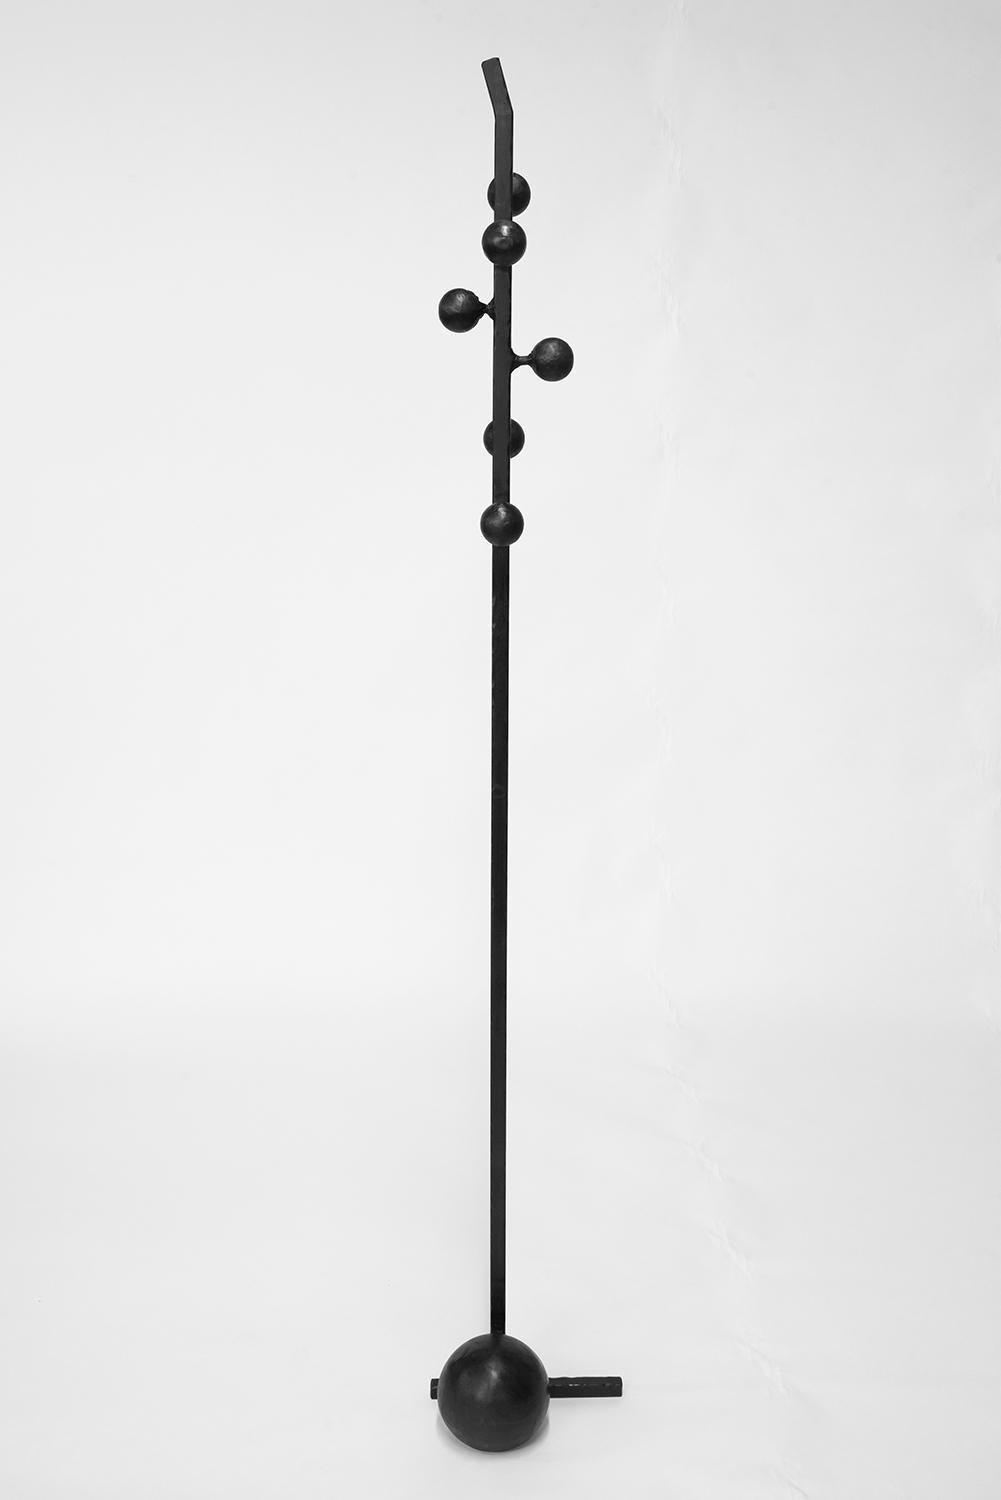 Coat Rack Sculptural Modern Spherical Geometric Handmade Carved Blackened Steel In New Condition For Sale In Bronx, NY